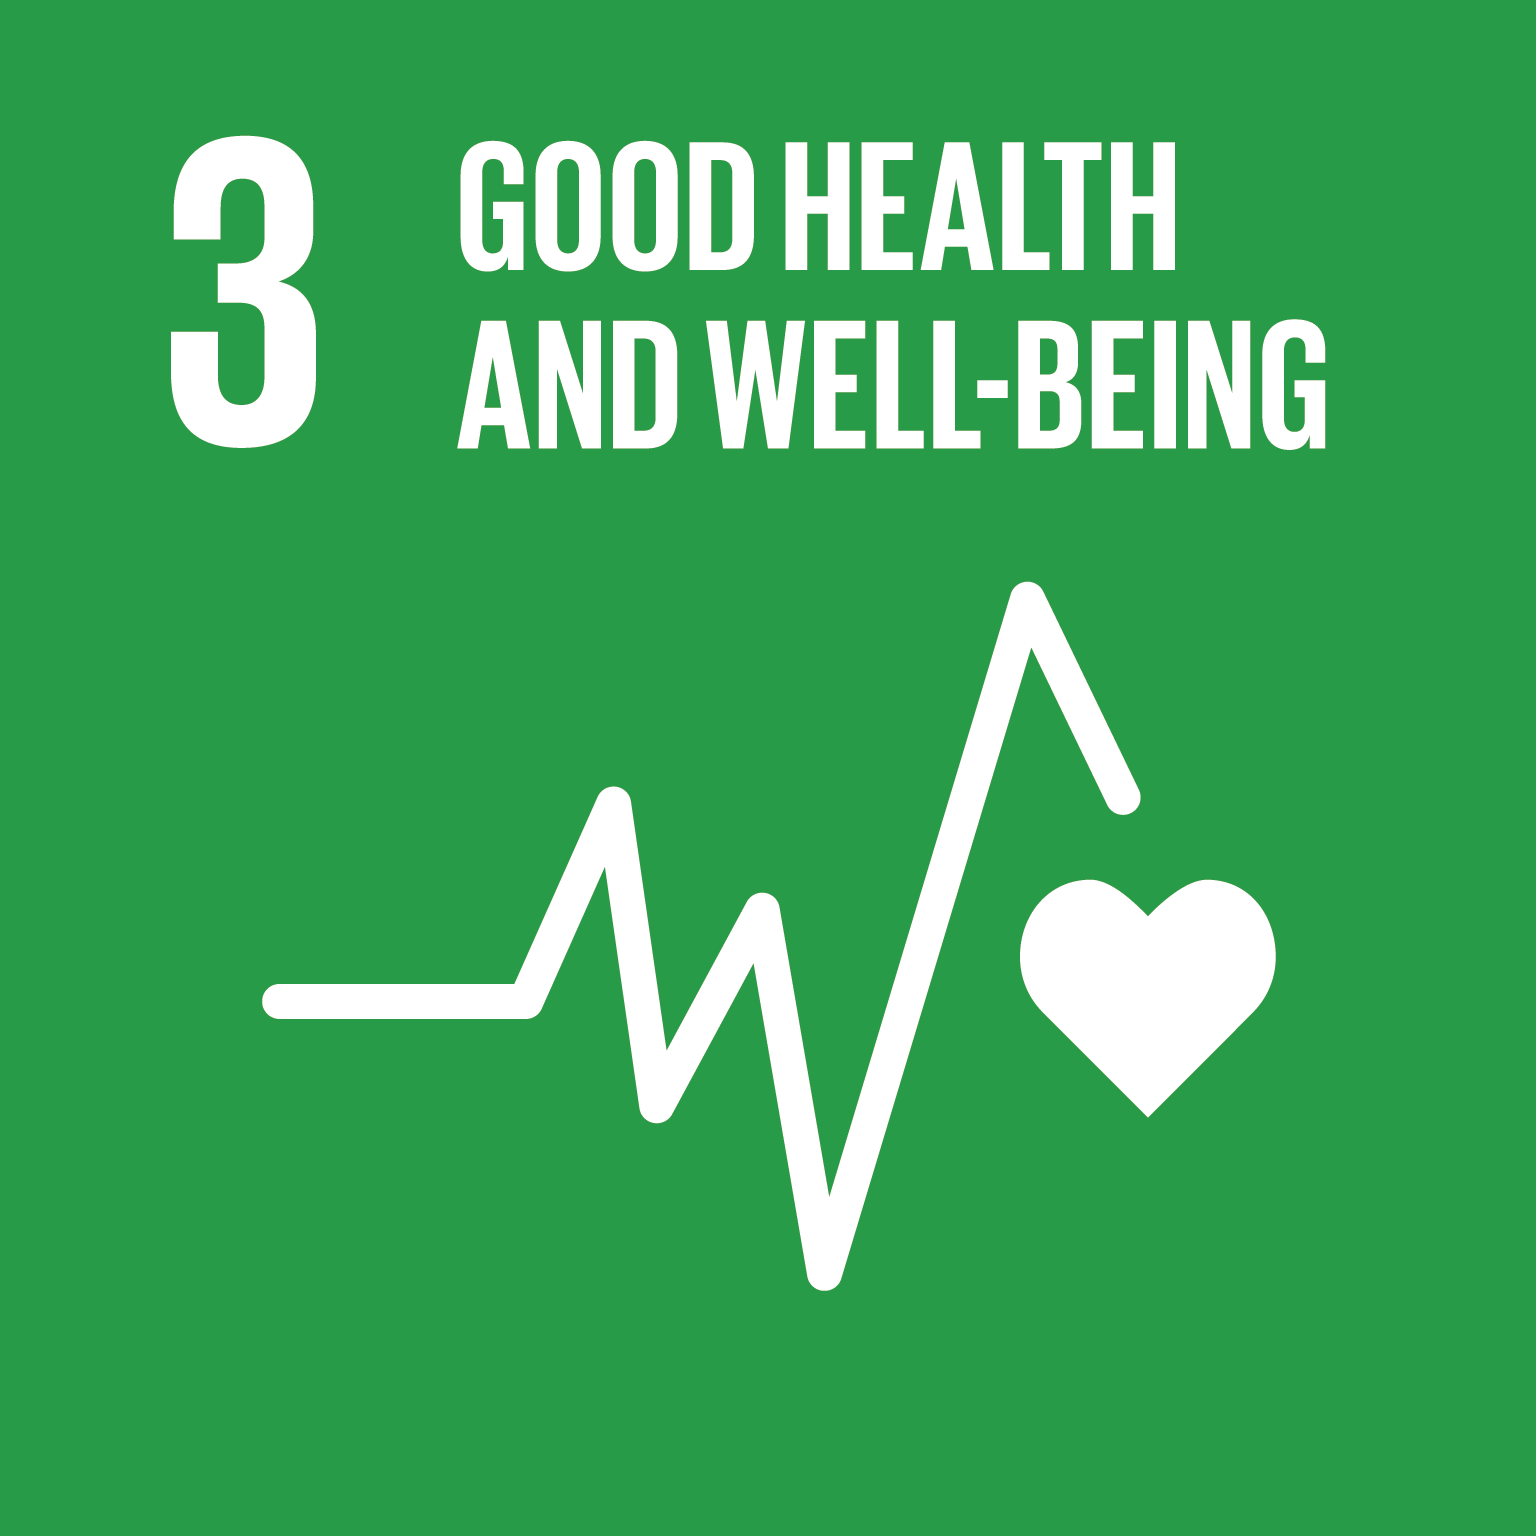 Goal 3: Good Health and Well-Being - Ensure healthy lives and promote well-being for all at all ages